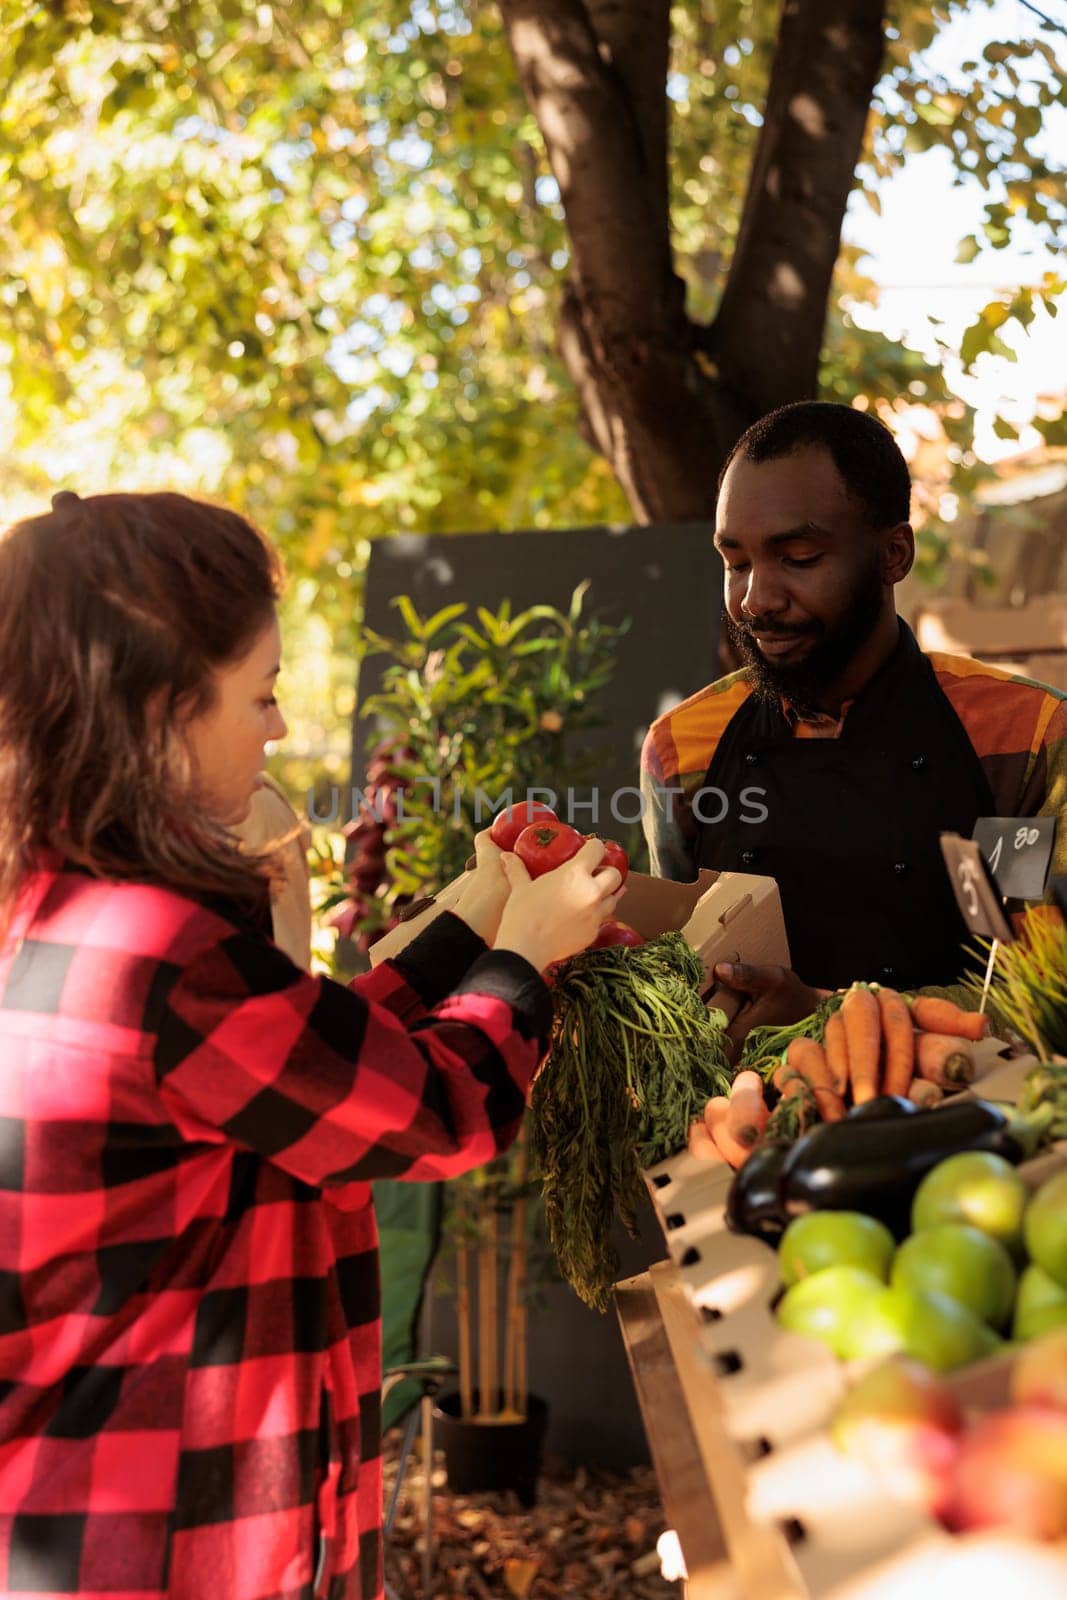 African american vendor selling organic fruits or veggies at small business farming shop, locally grown seasonal products. Female client looking at colorful fresh natural produce, farmers market.